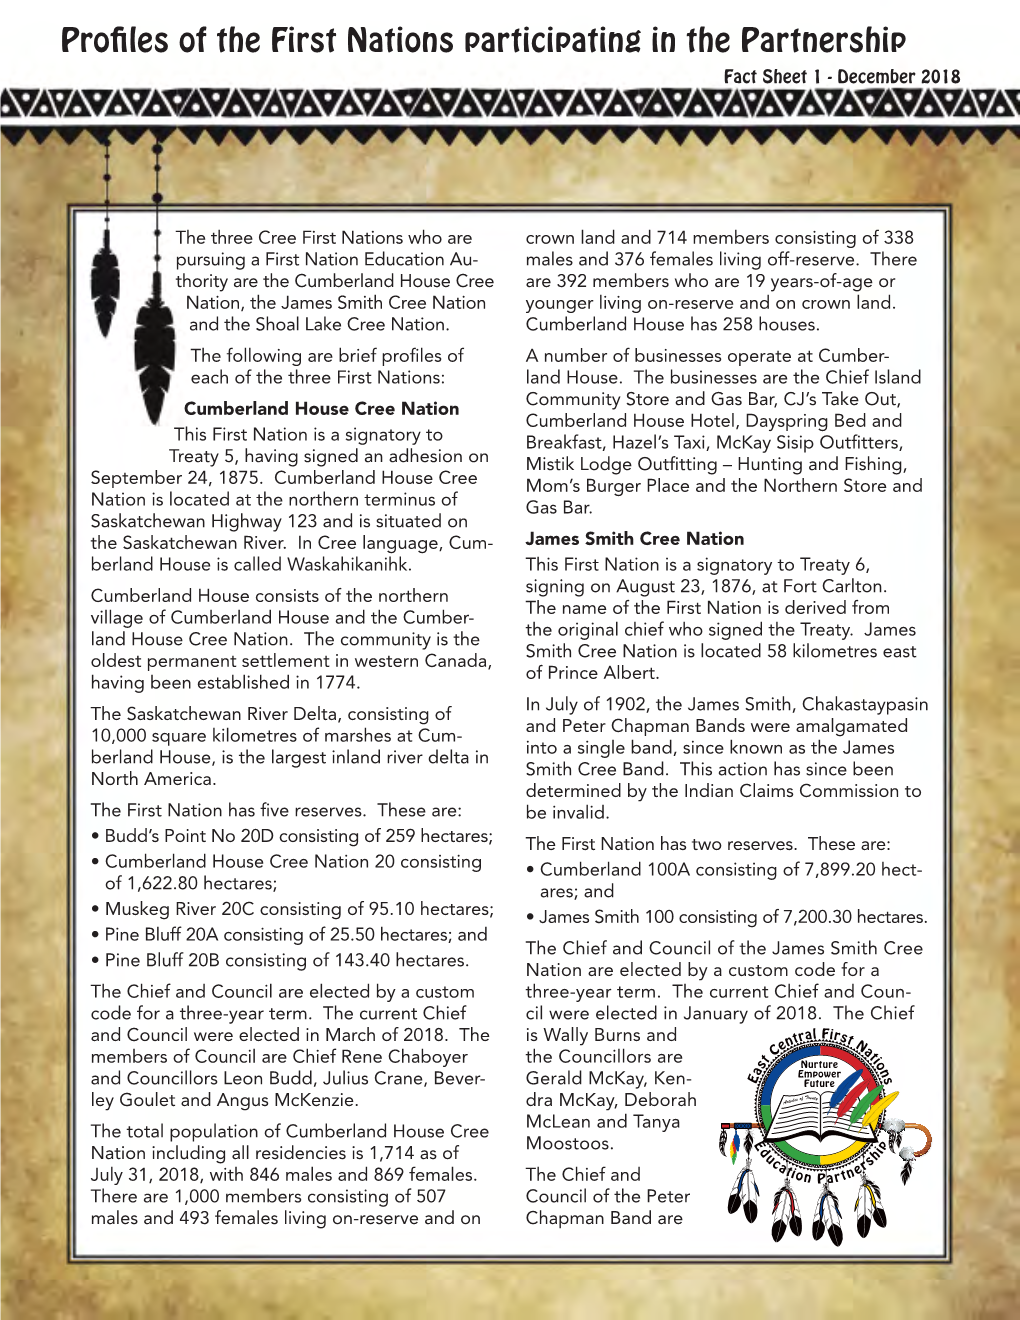 Profiles of the First Nations Participating in the Partnership Fact Sheet 1 - December 2018